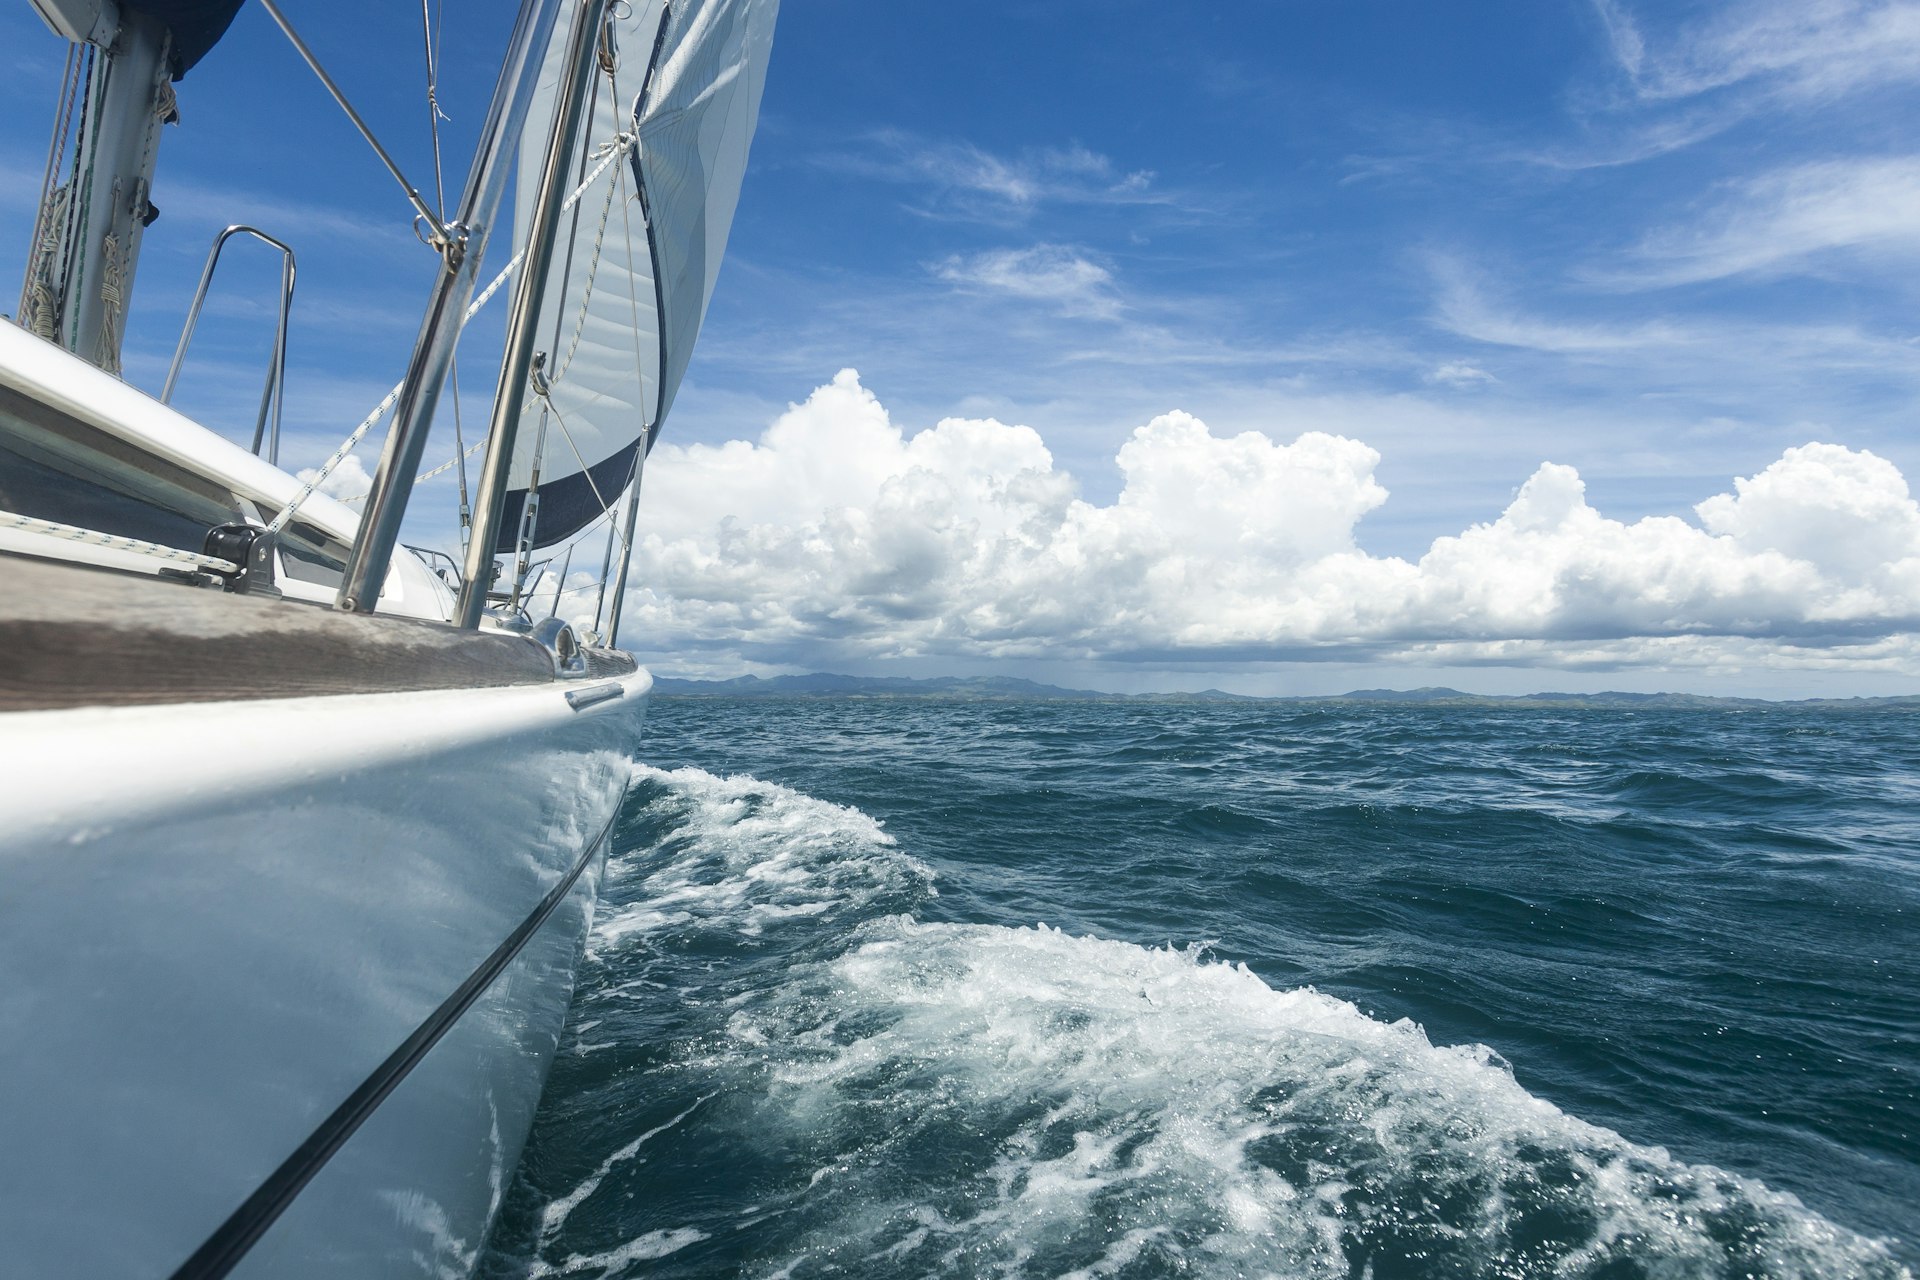 A pleasure yacht under full sail in Fiji, shot from the starboard side towards the bow